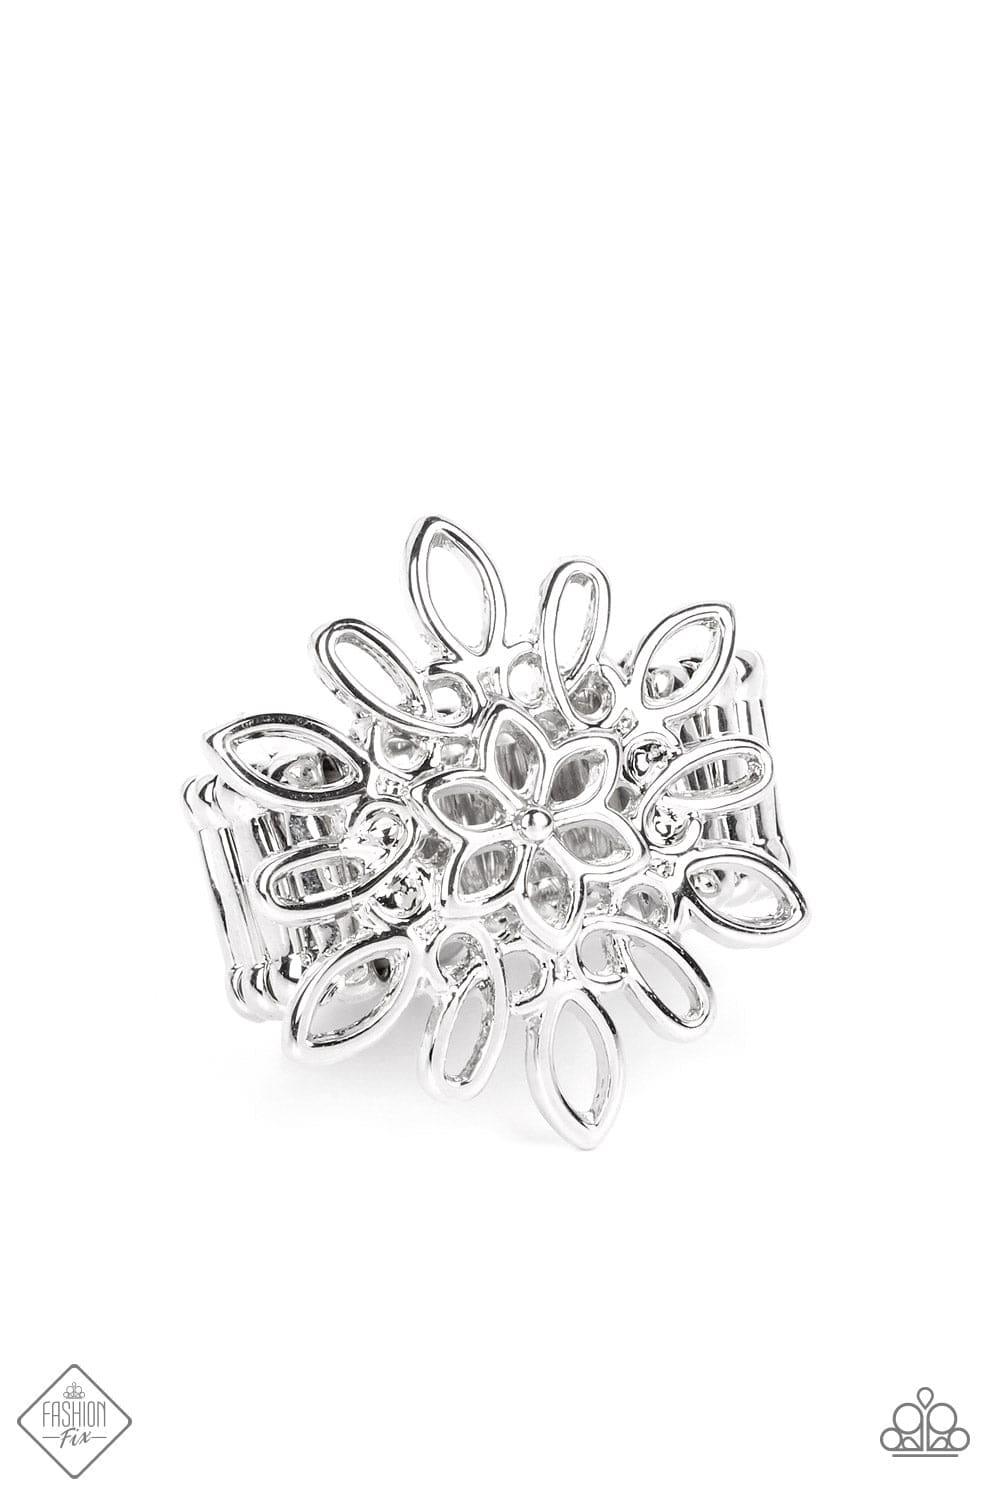 Paparazzi Accessories - Coastal Chic - Silver Ring - Bling by JessieK